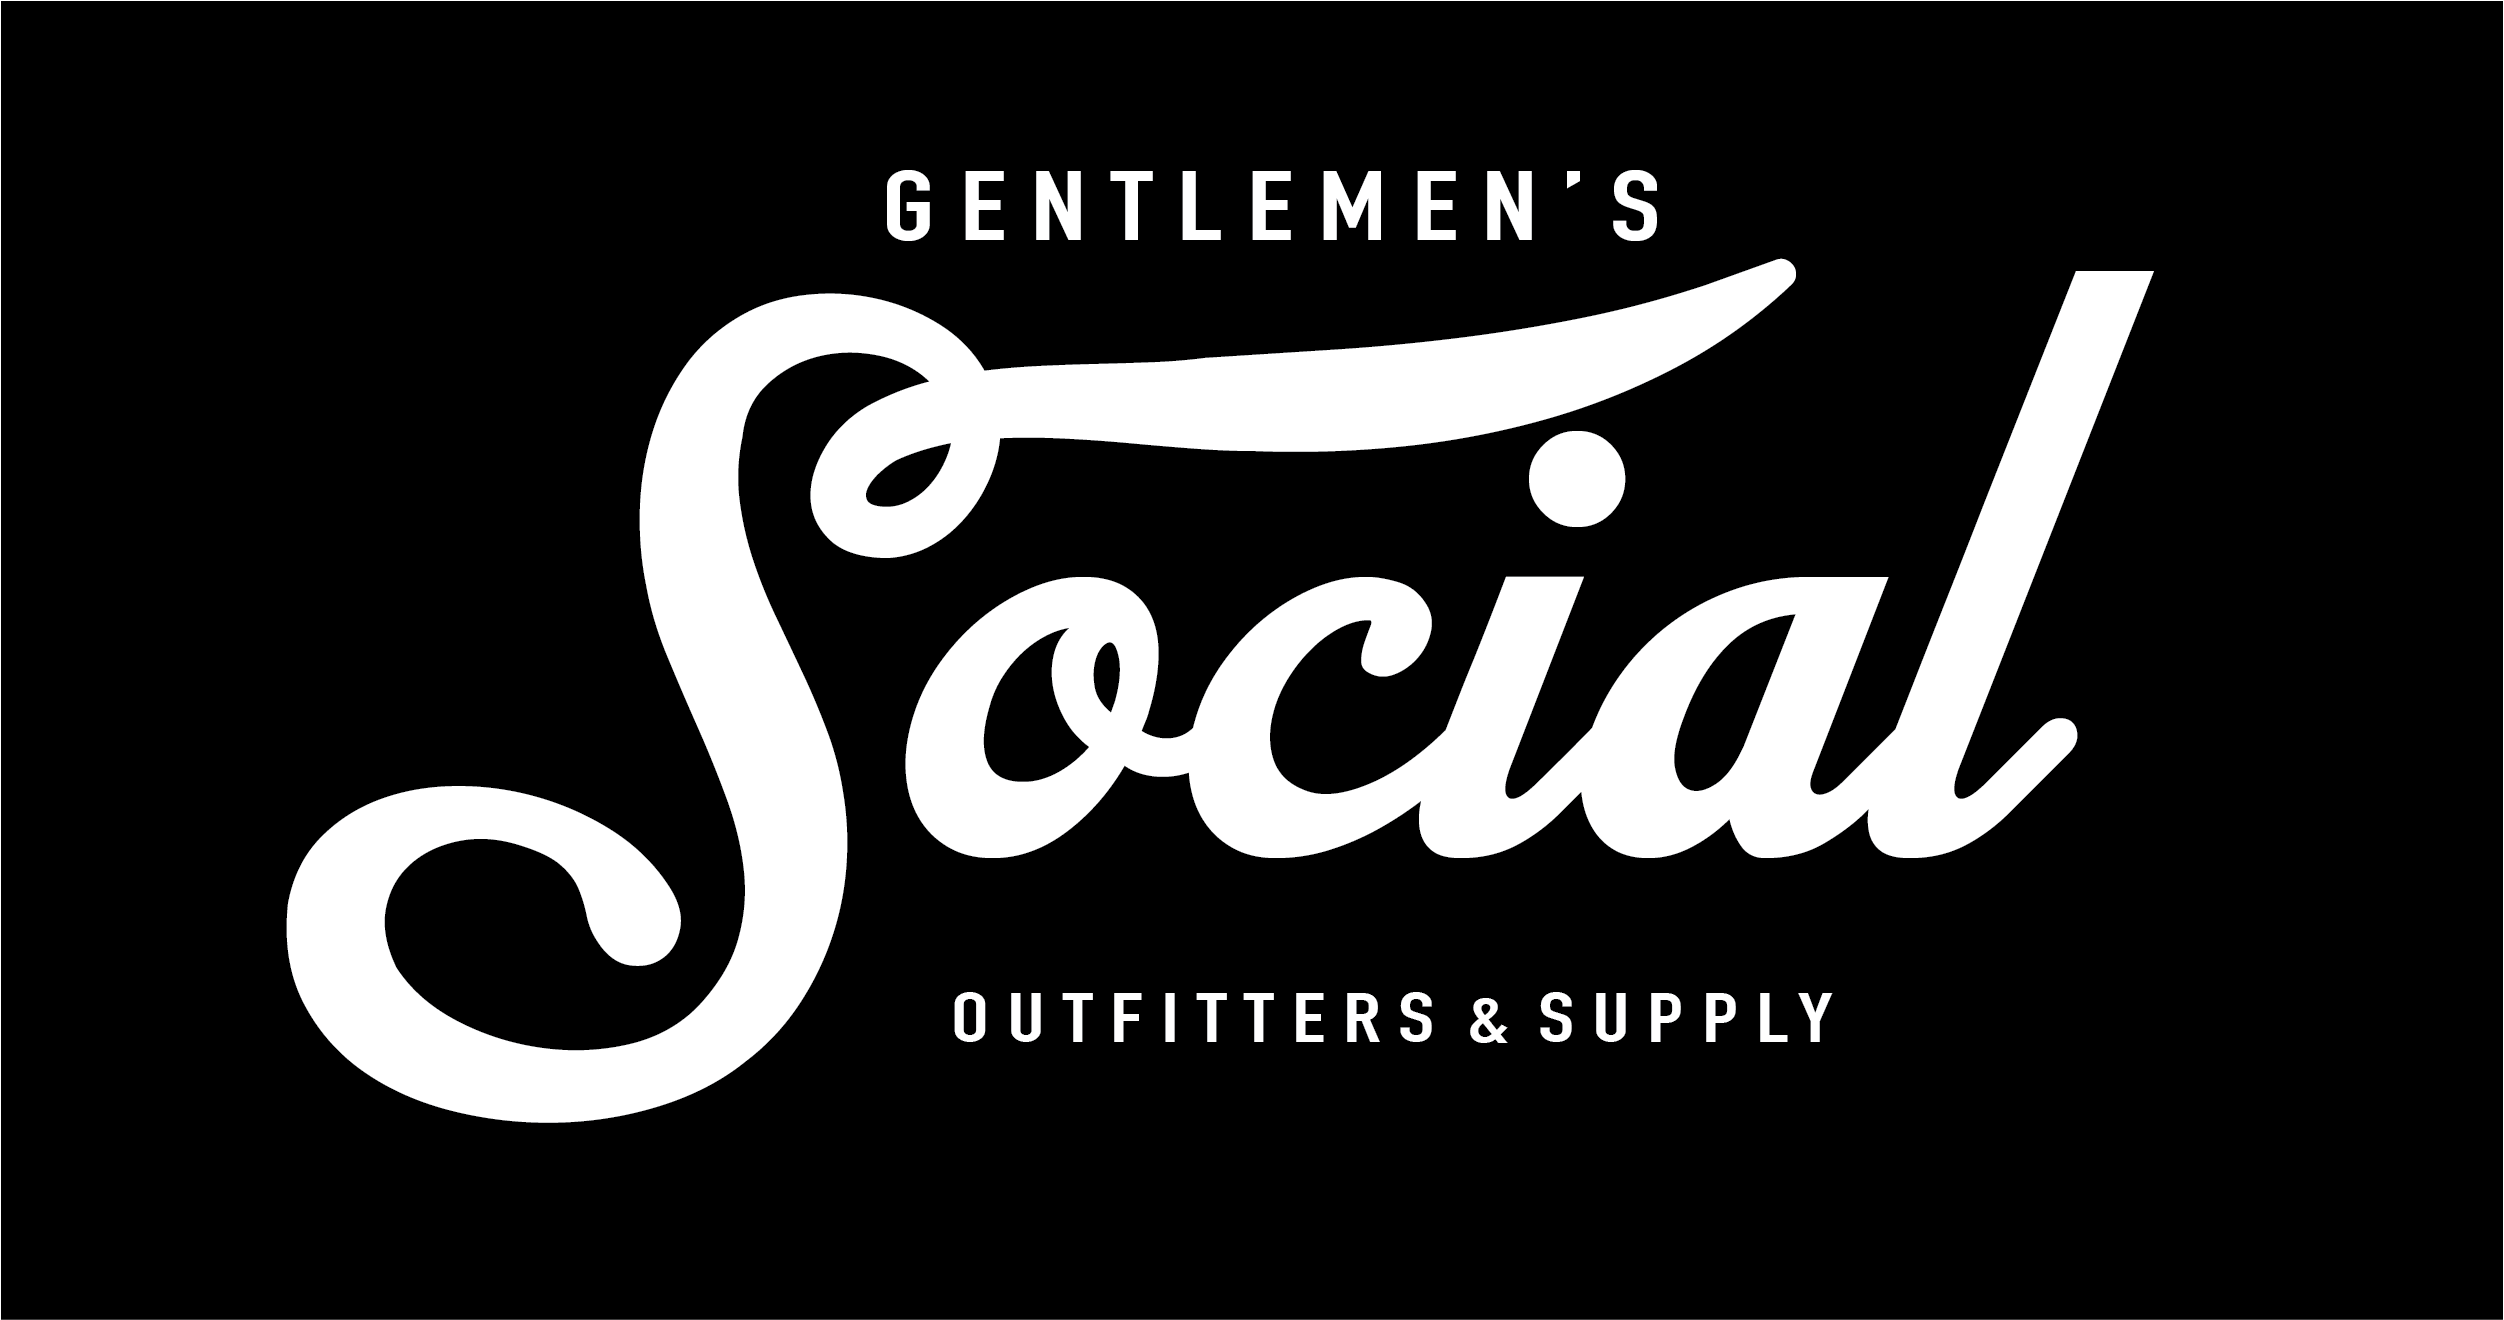 Contact – Gentlemen's Social Outfitter & Supply